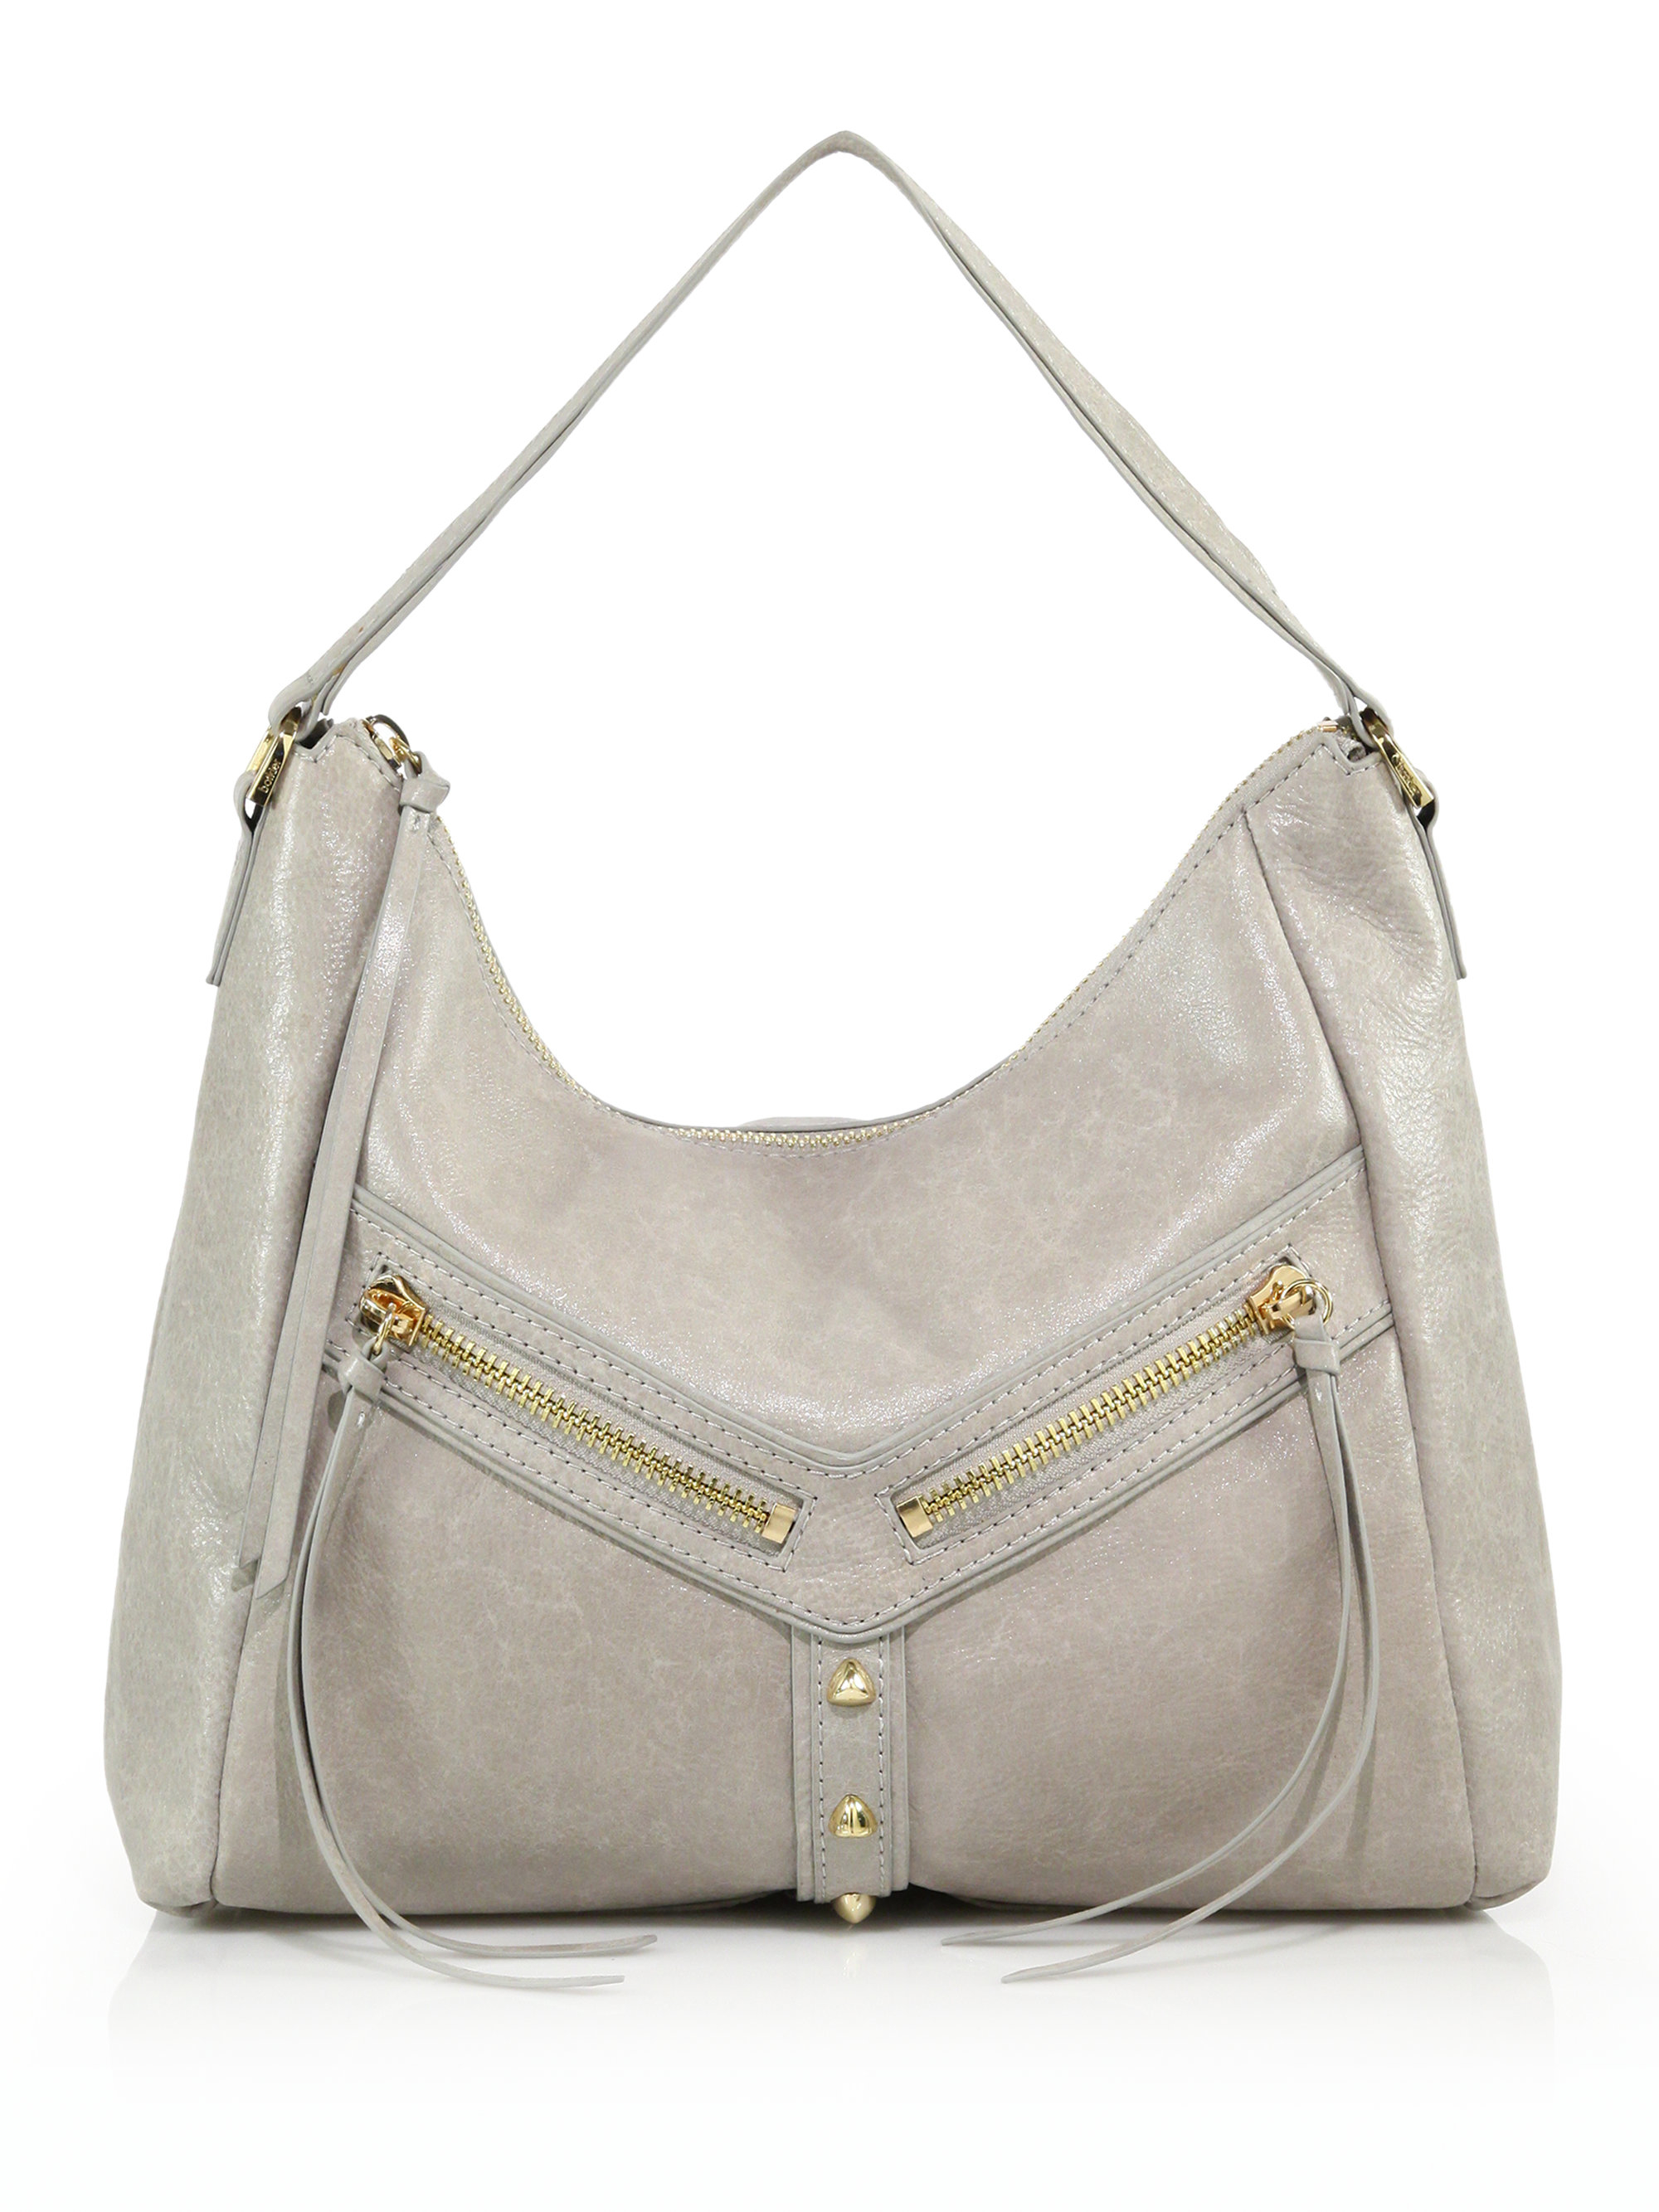 Botkier Trigger Leather Hobo Bag in Gray | Lyst